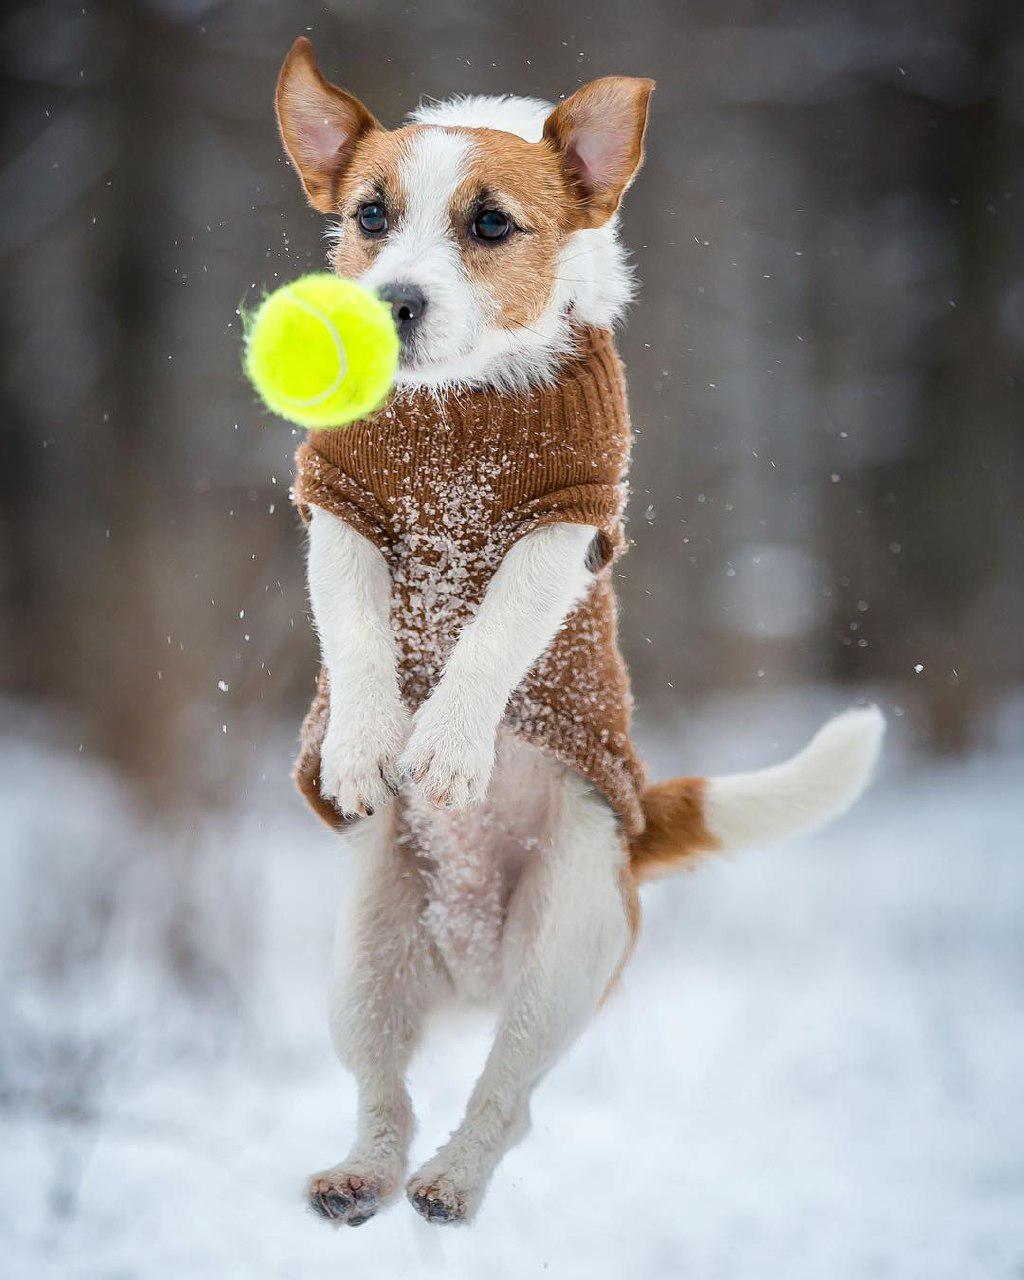 Jack Russell wearing a brown sweater while jumping towards the ball in snow